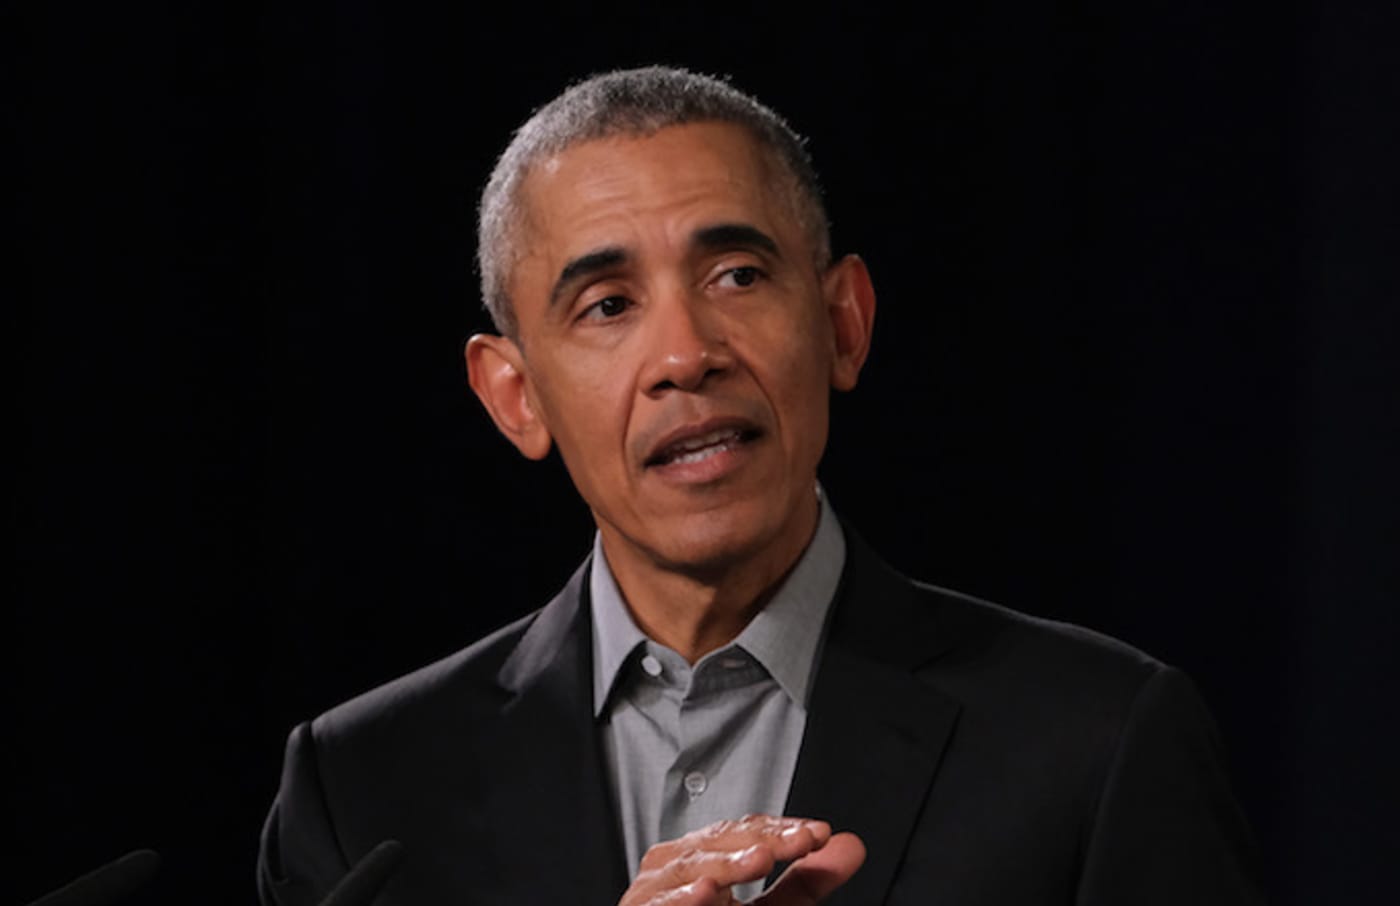 Barack Obama speaks to young leaders from across Europe in a Town Hall styled session.